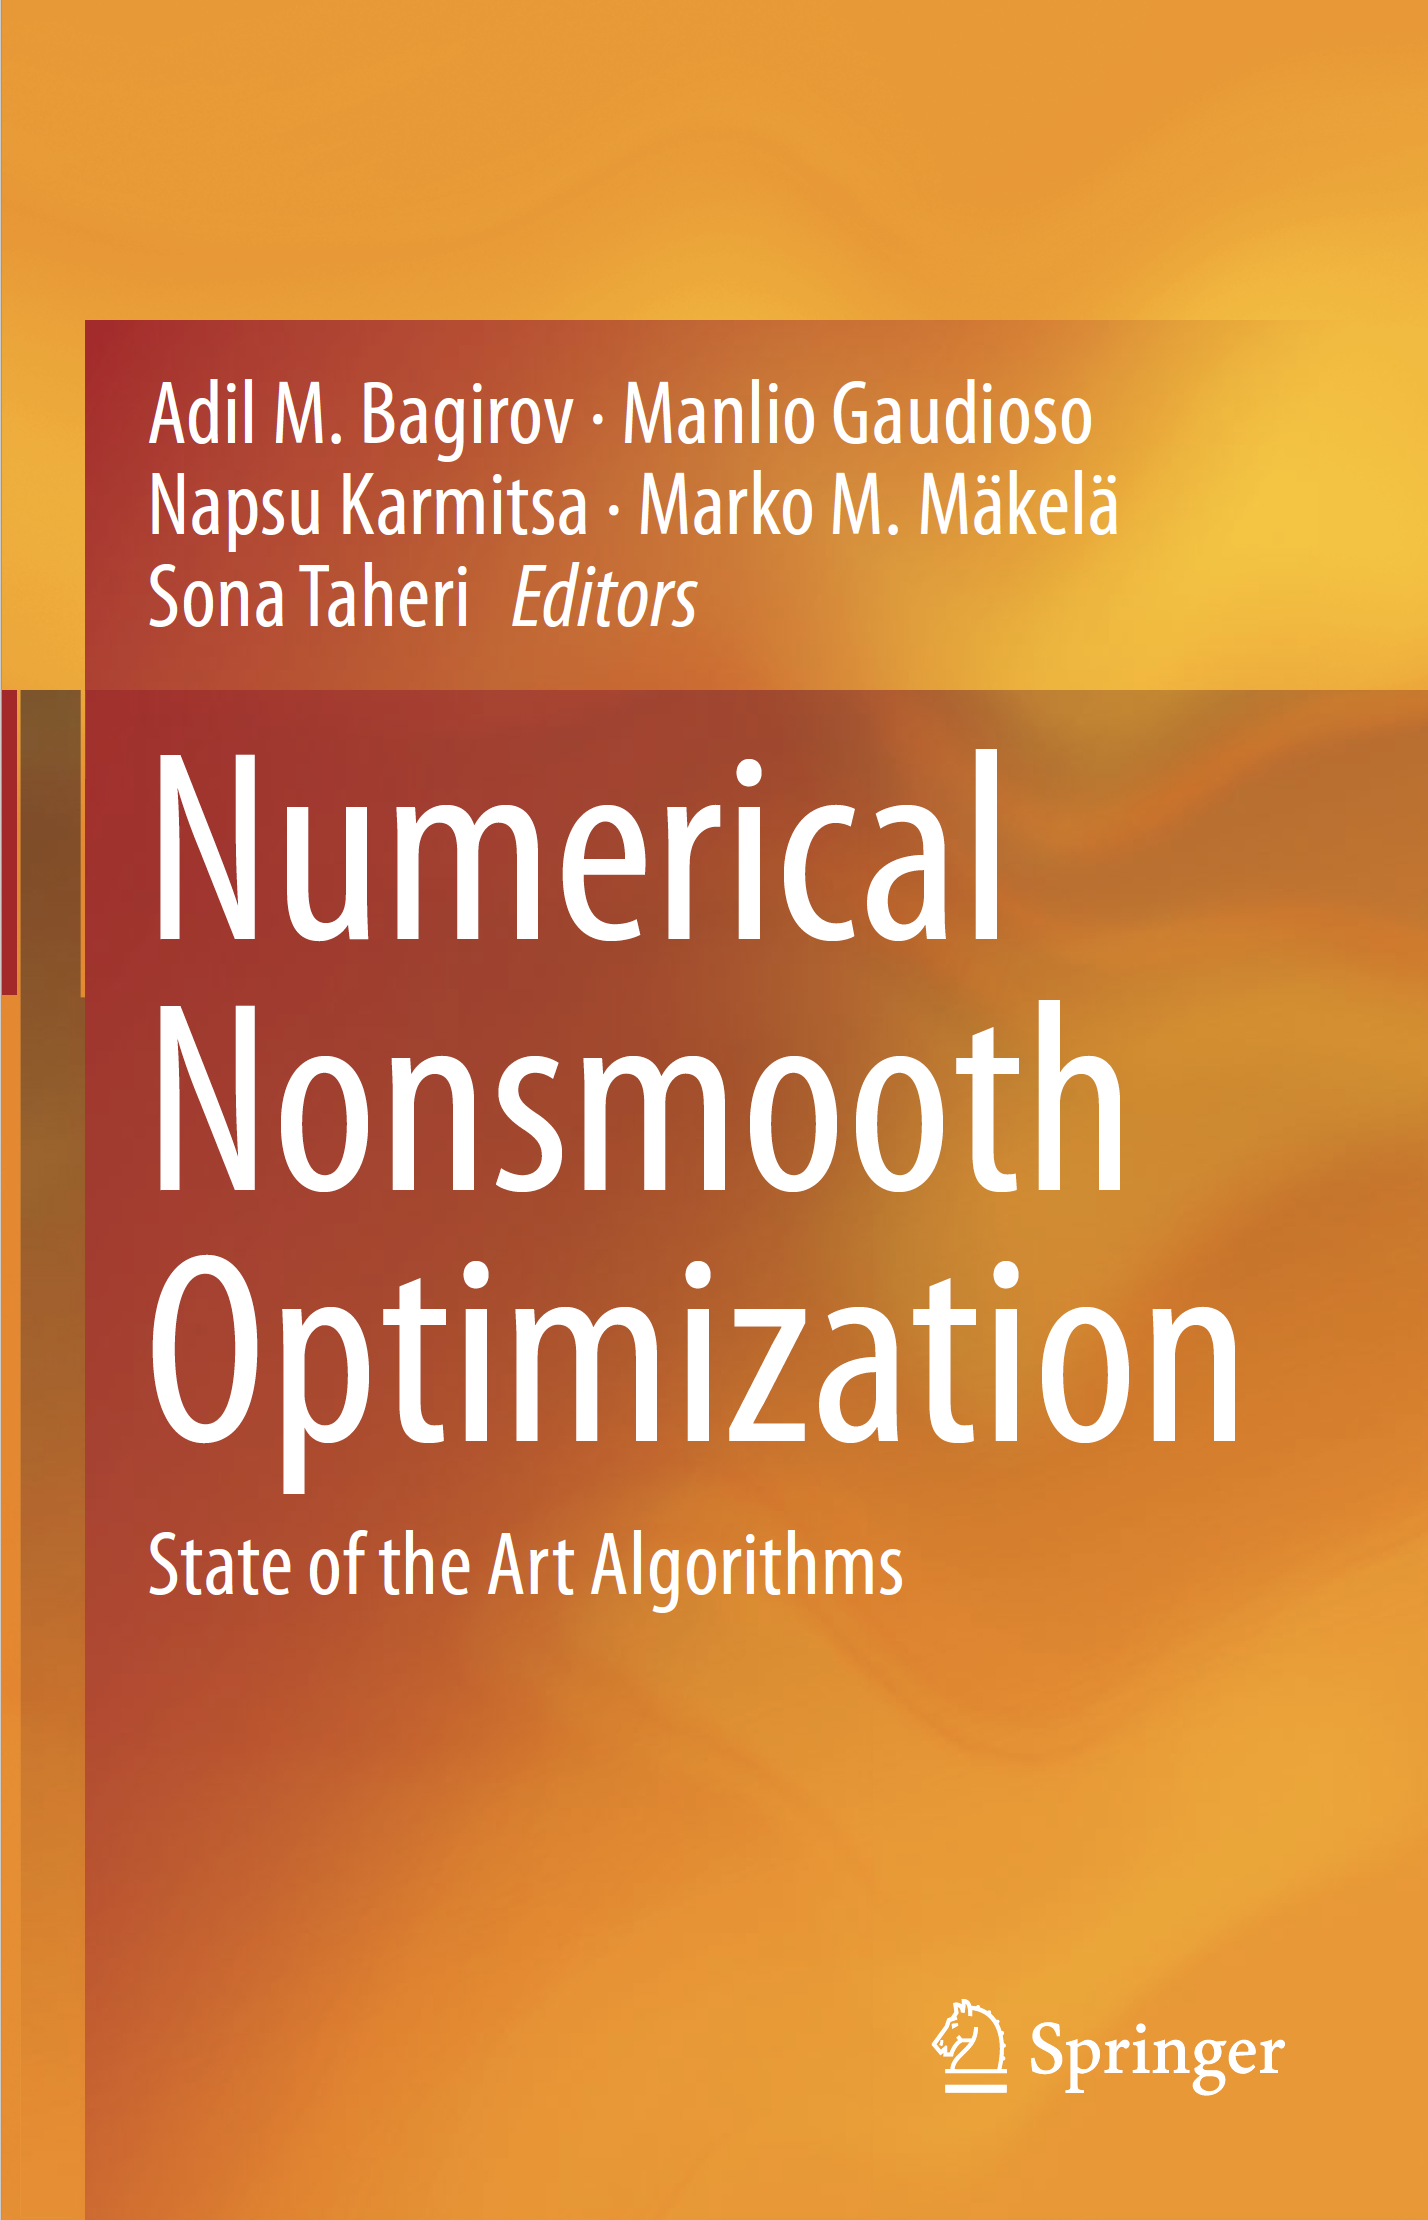 My book: Numerical Nonsmooth Optimization